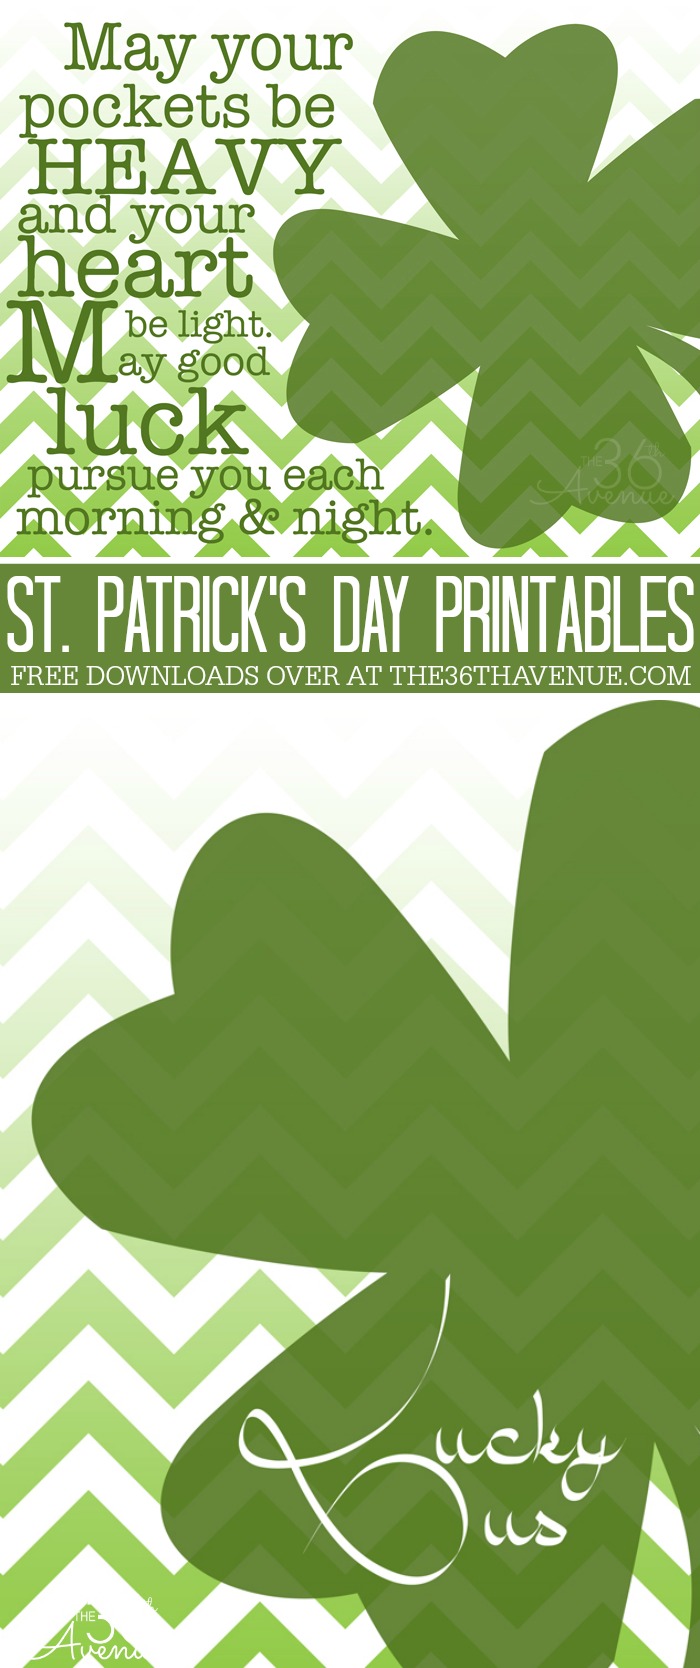 St. Patrick's Day Free Printables at the36thavenue.com Pin it now and print them later! 